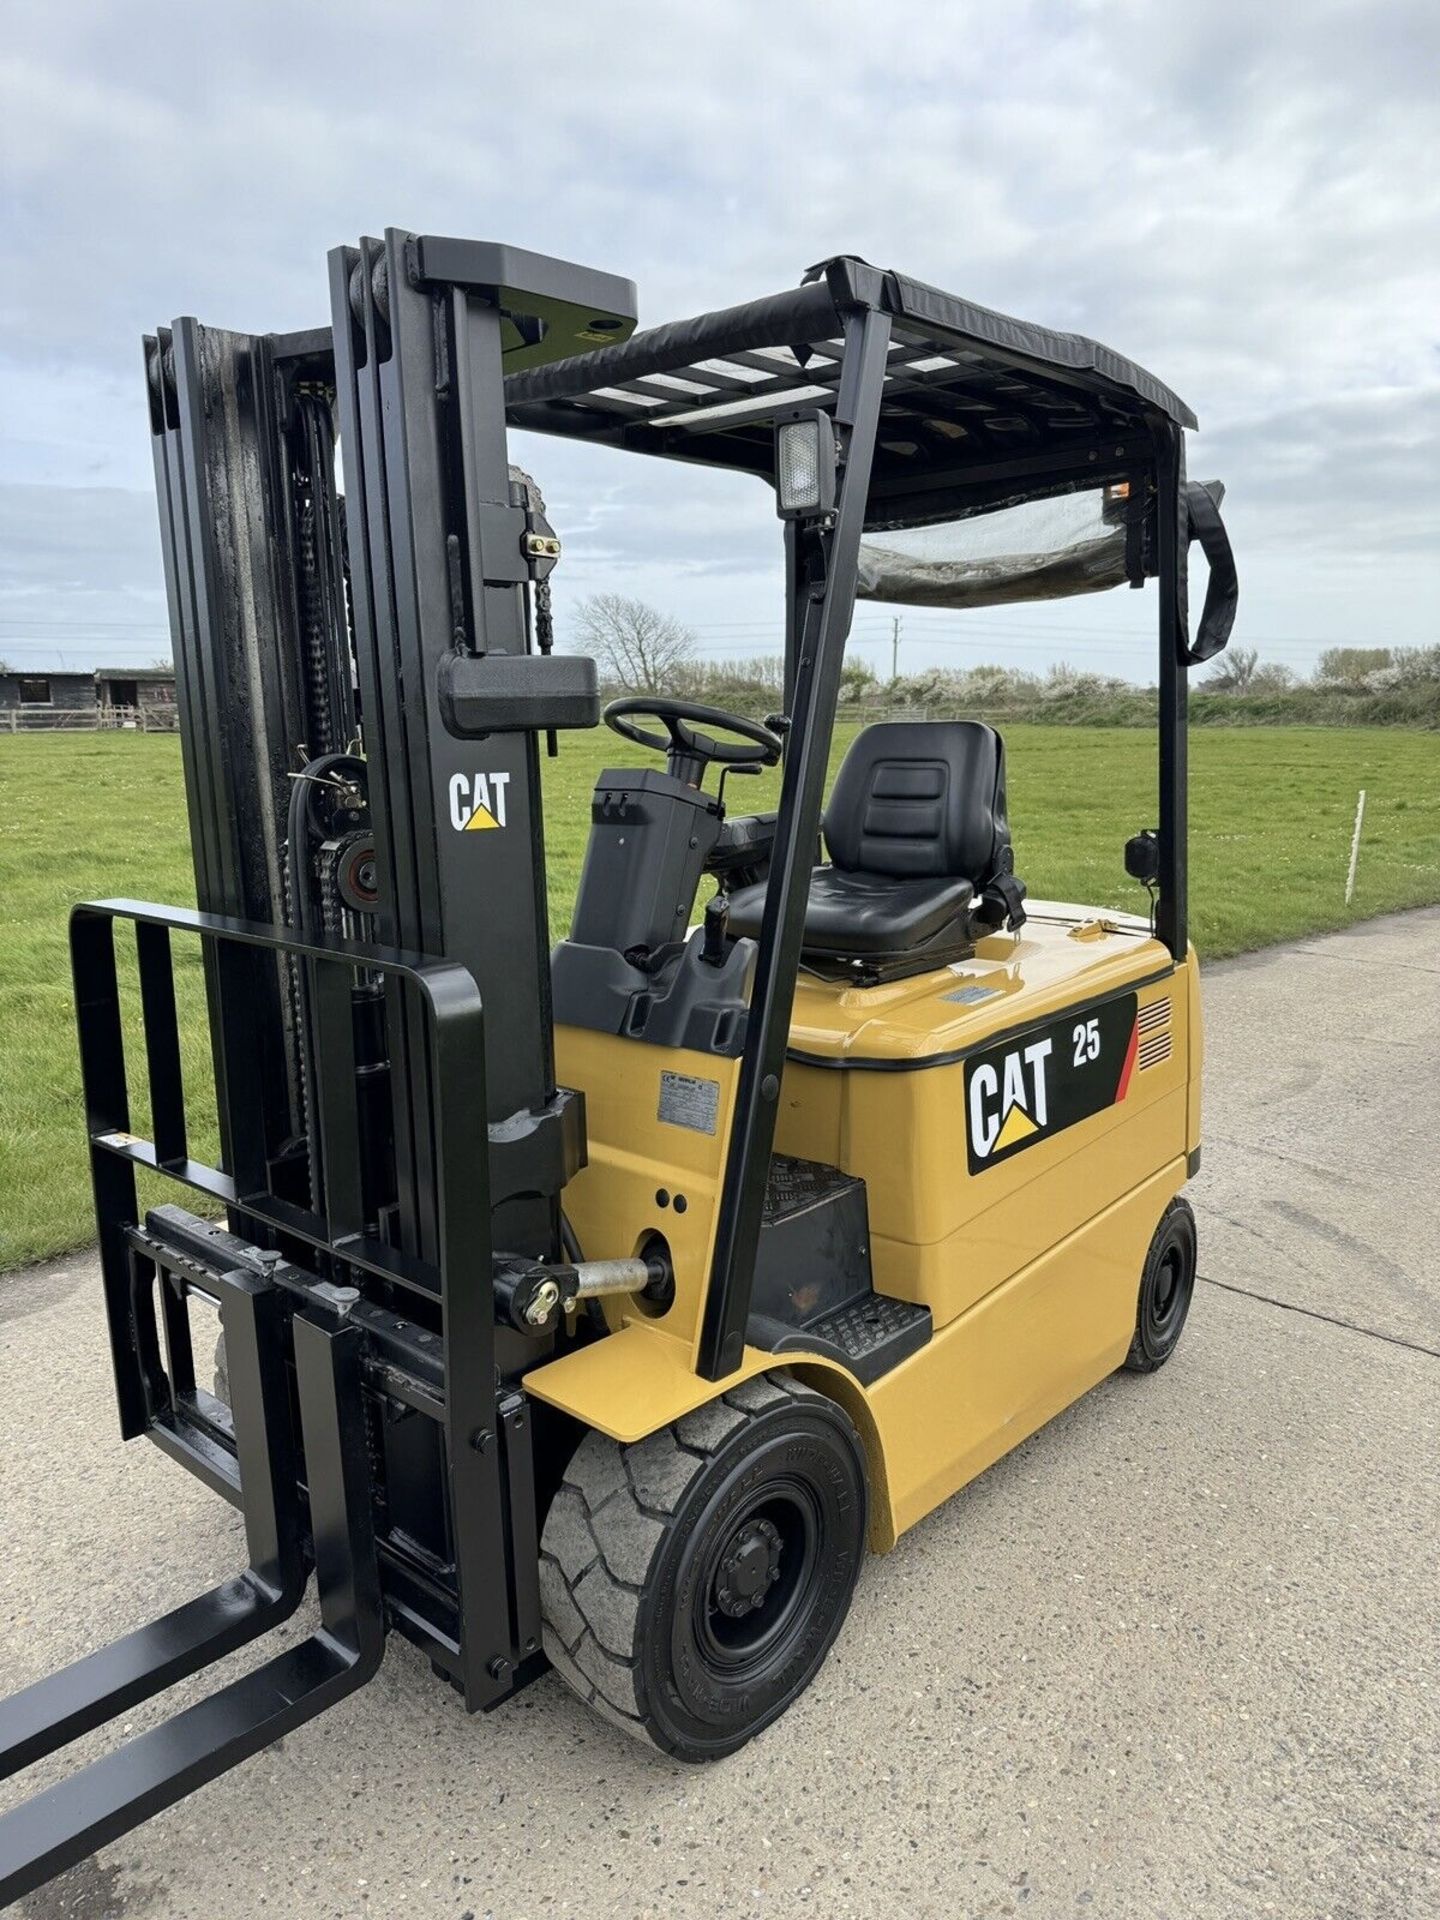 CATERPILLAR - 2.5 Tonne Electric Forklift Truck (Container Spec) - Image 5 of 7